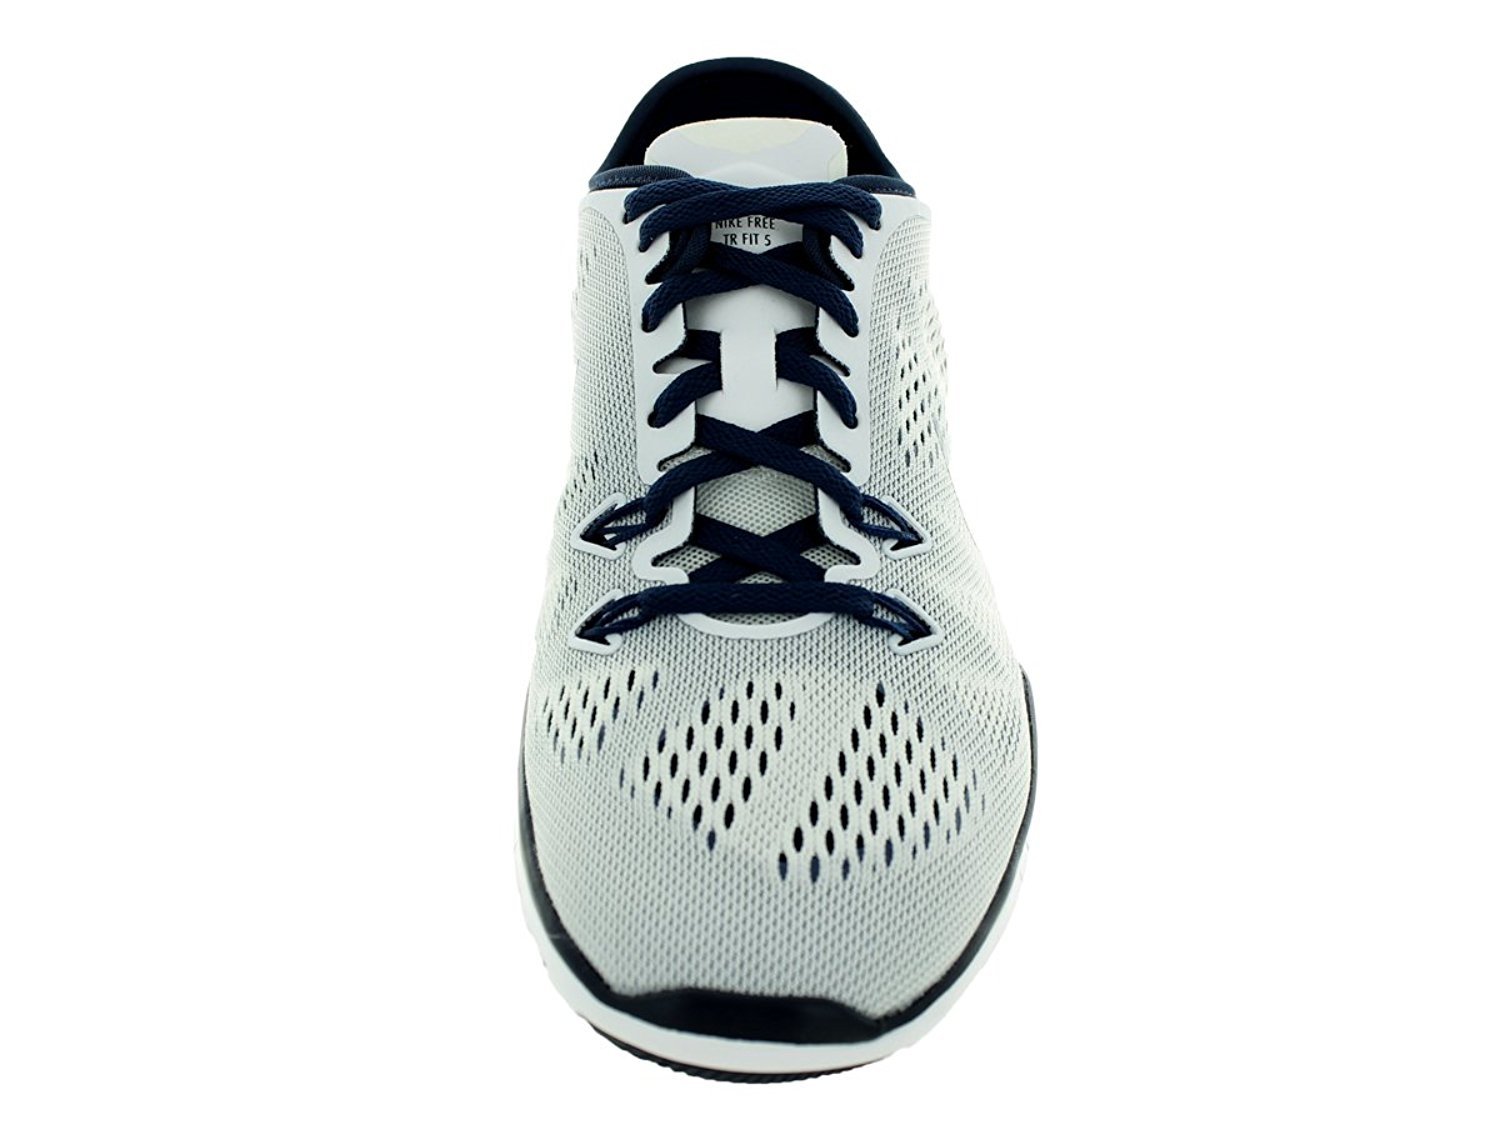 Nike Free 5.0 TR Fit 5 Women's Cross Training Shoes (5.5, WHITE/MIDNIGHT NAVY) - image 2 of 5